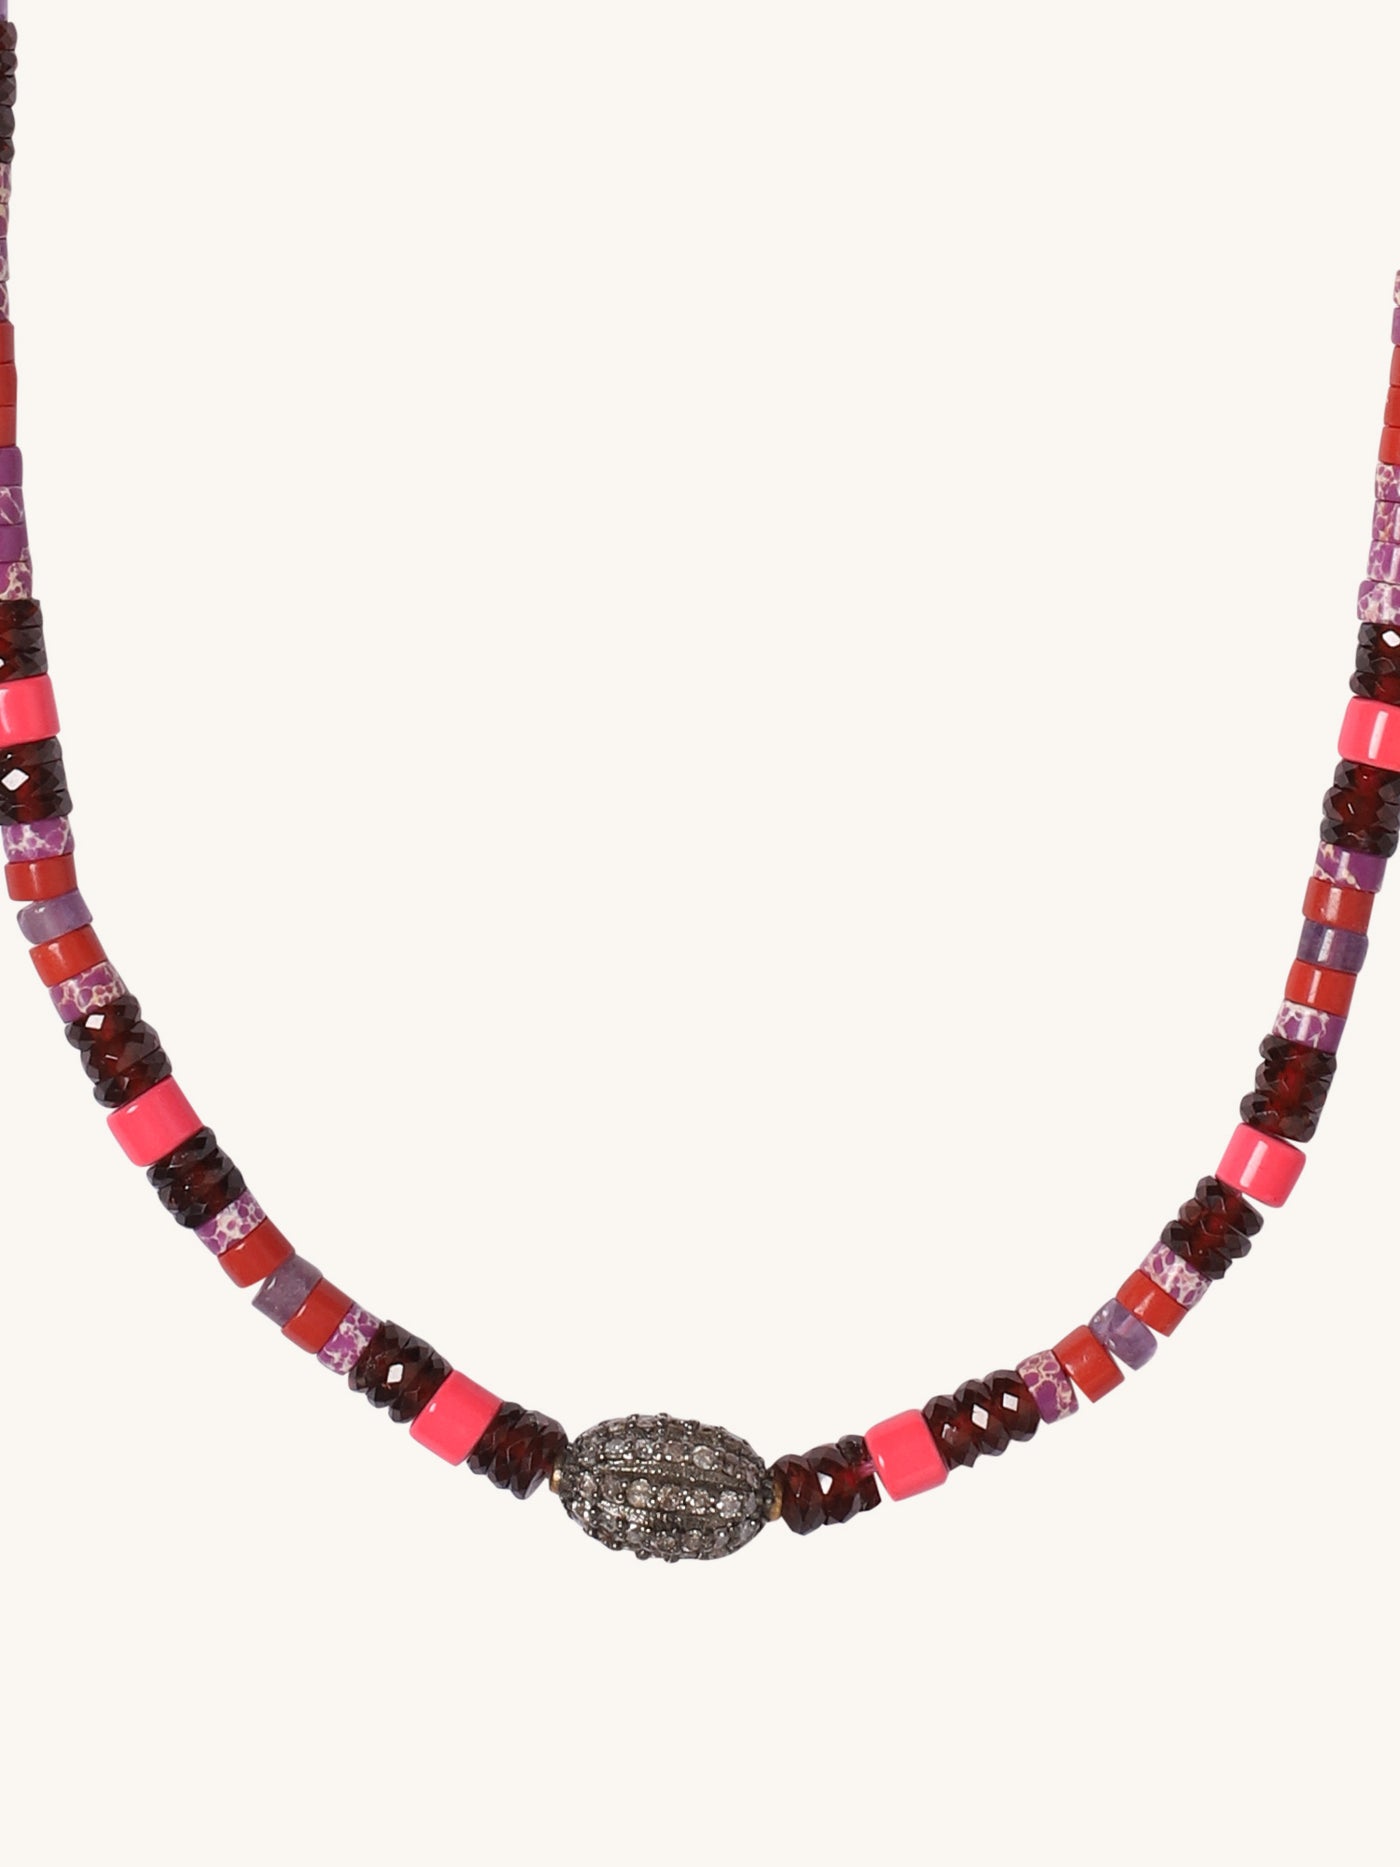 The Candy Collection Beaded Necklace